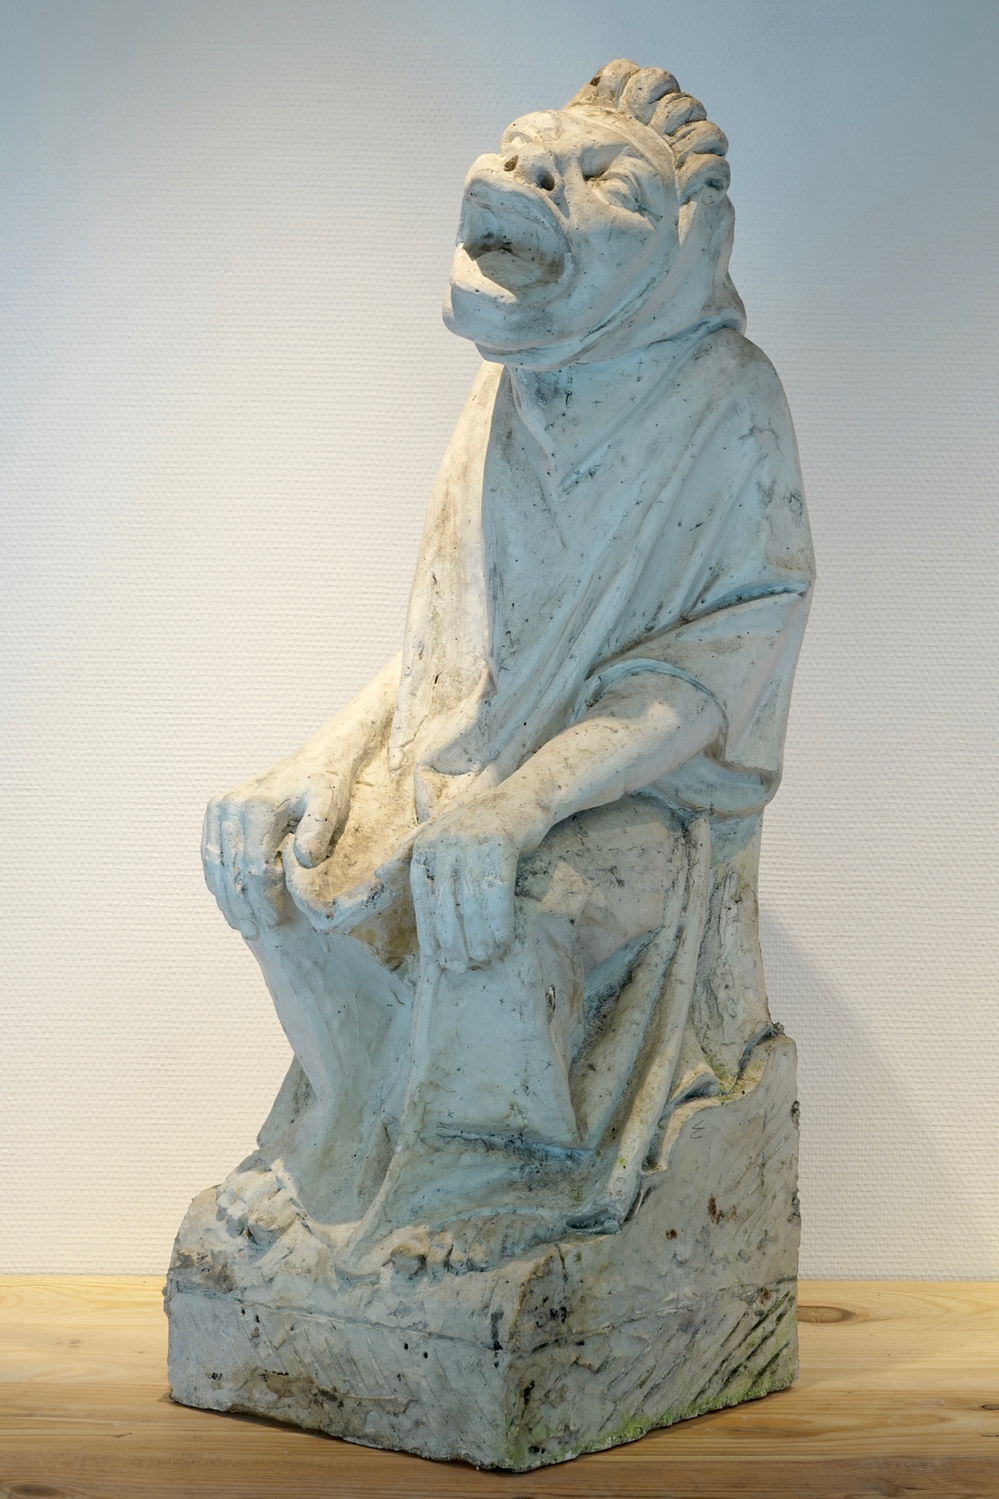 A neo-gothic style plaster cast of a seated figure, 19/20th C., Bruges